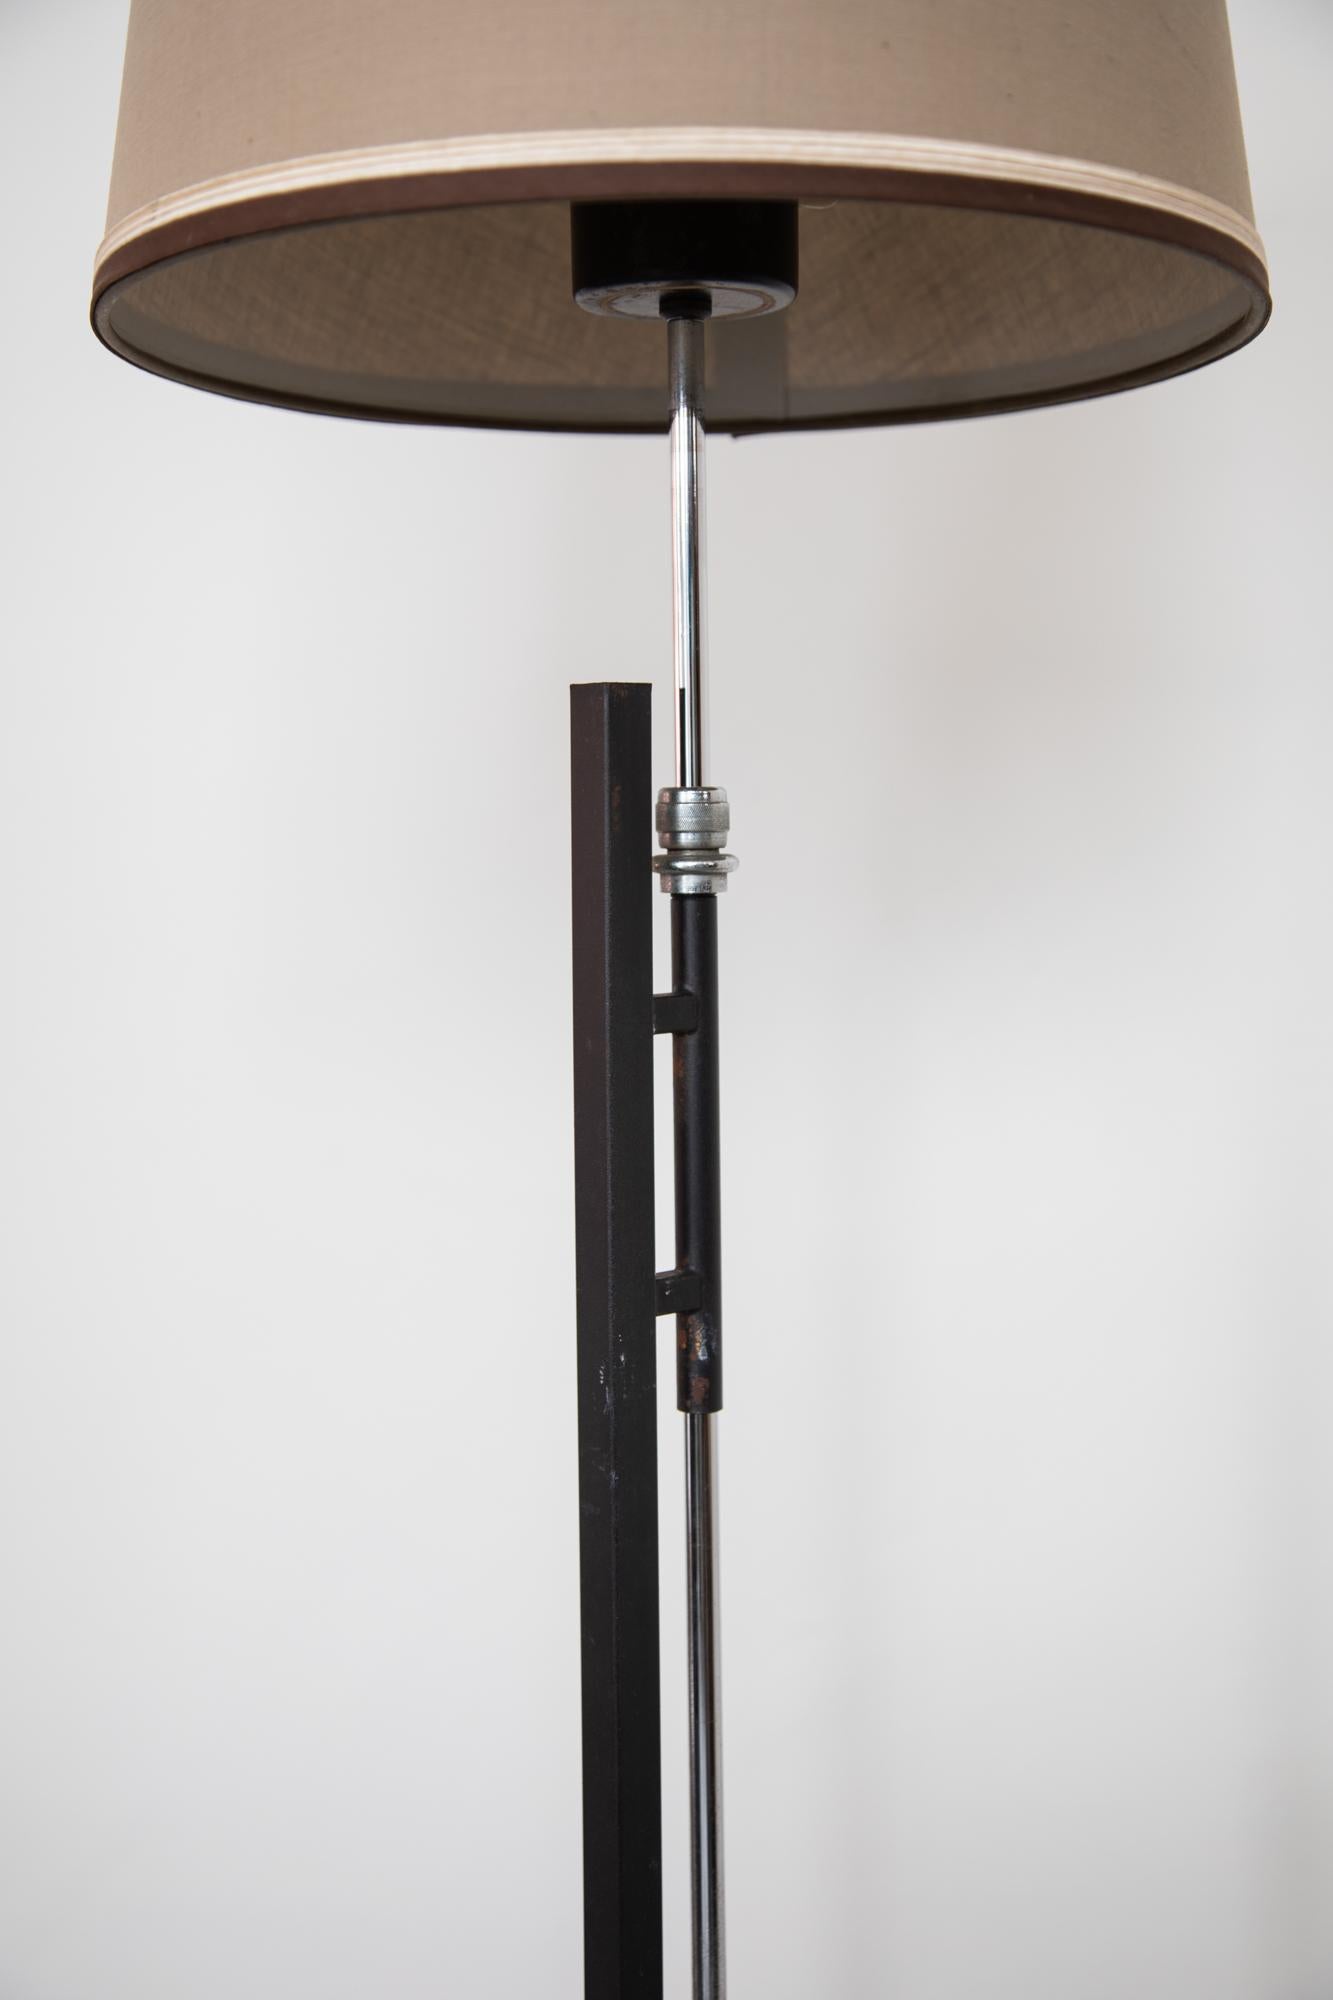 Lacquered French Metal Floor Lamp, Adjustable Shade by Roger Fatus for Disderot, 1960s For Sale